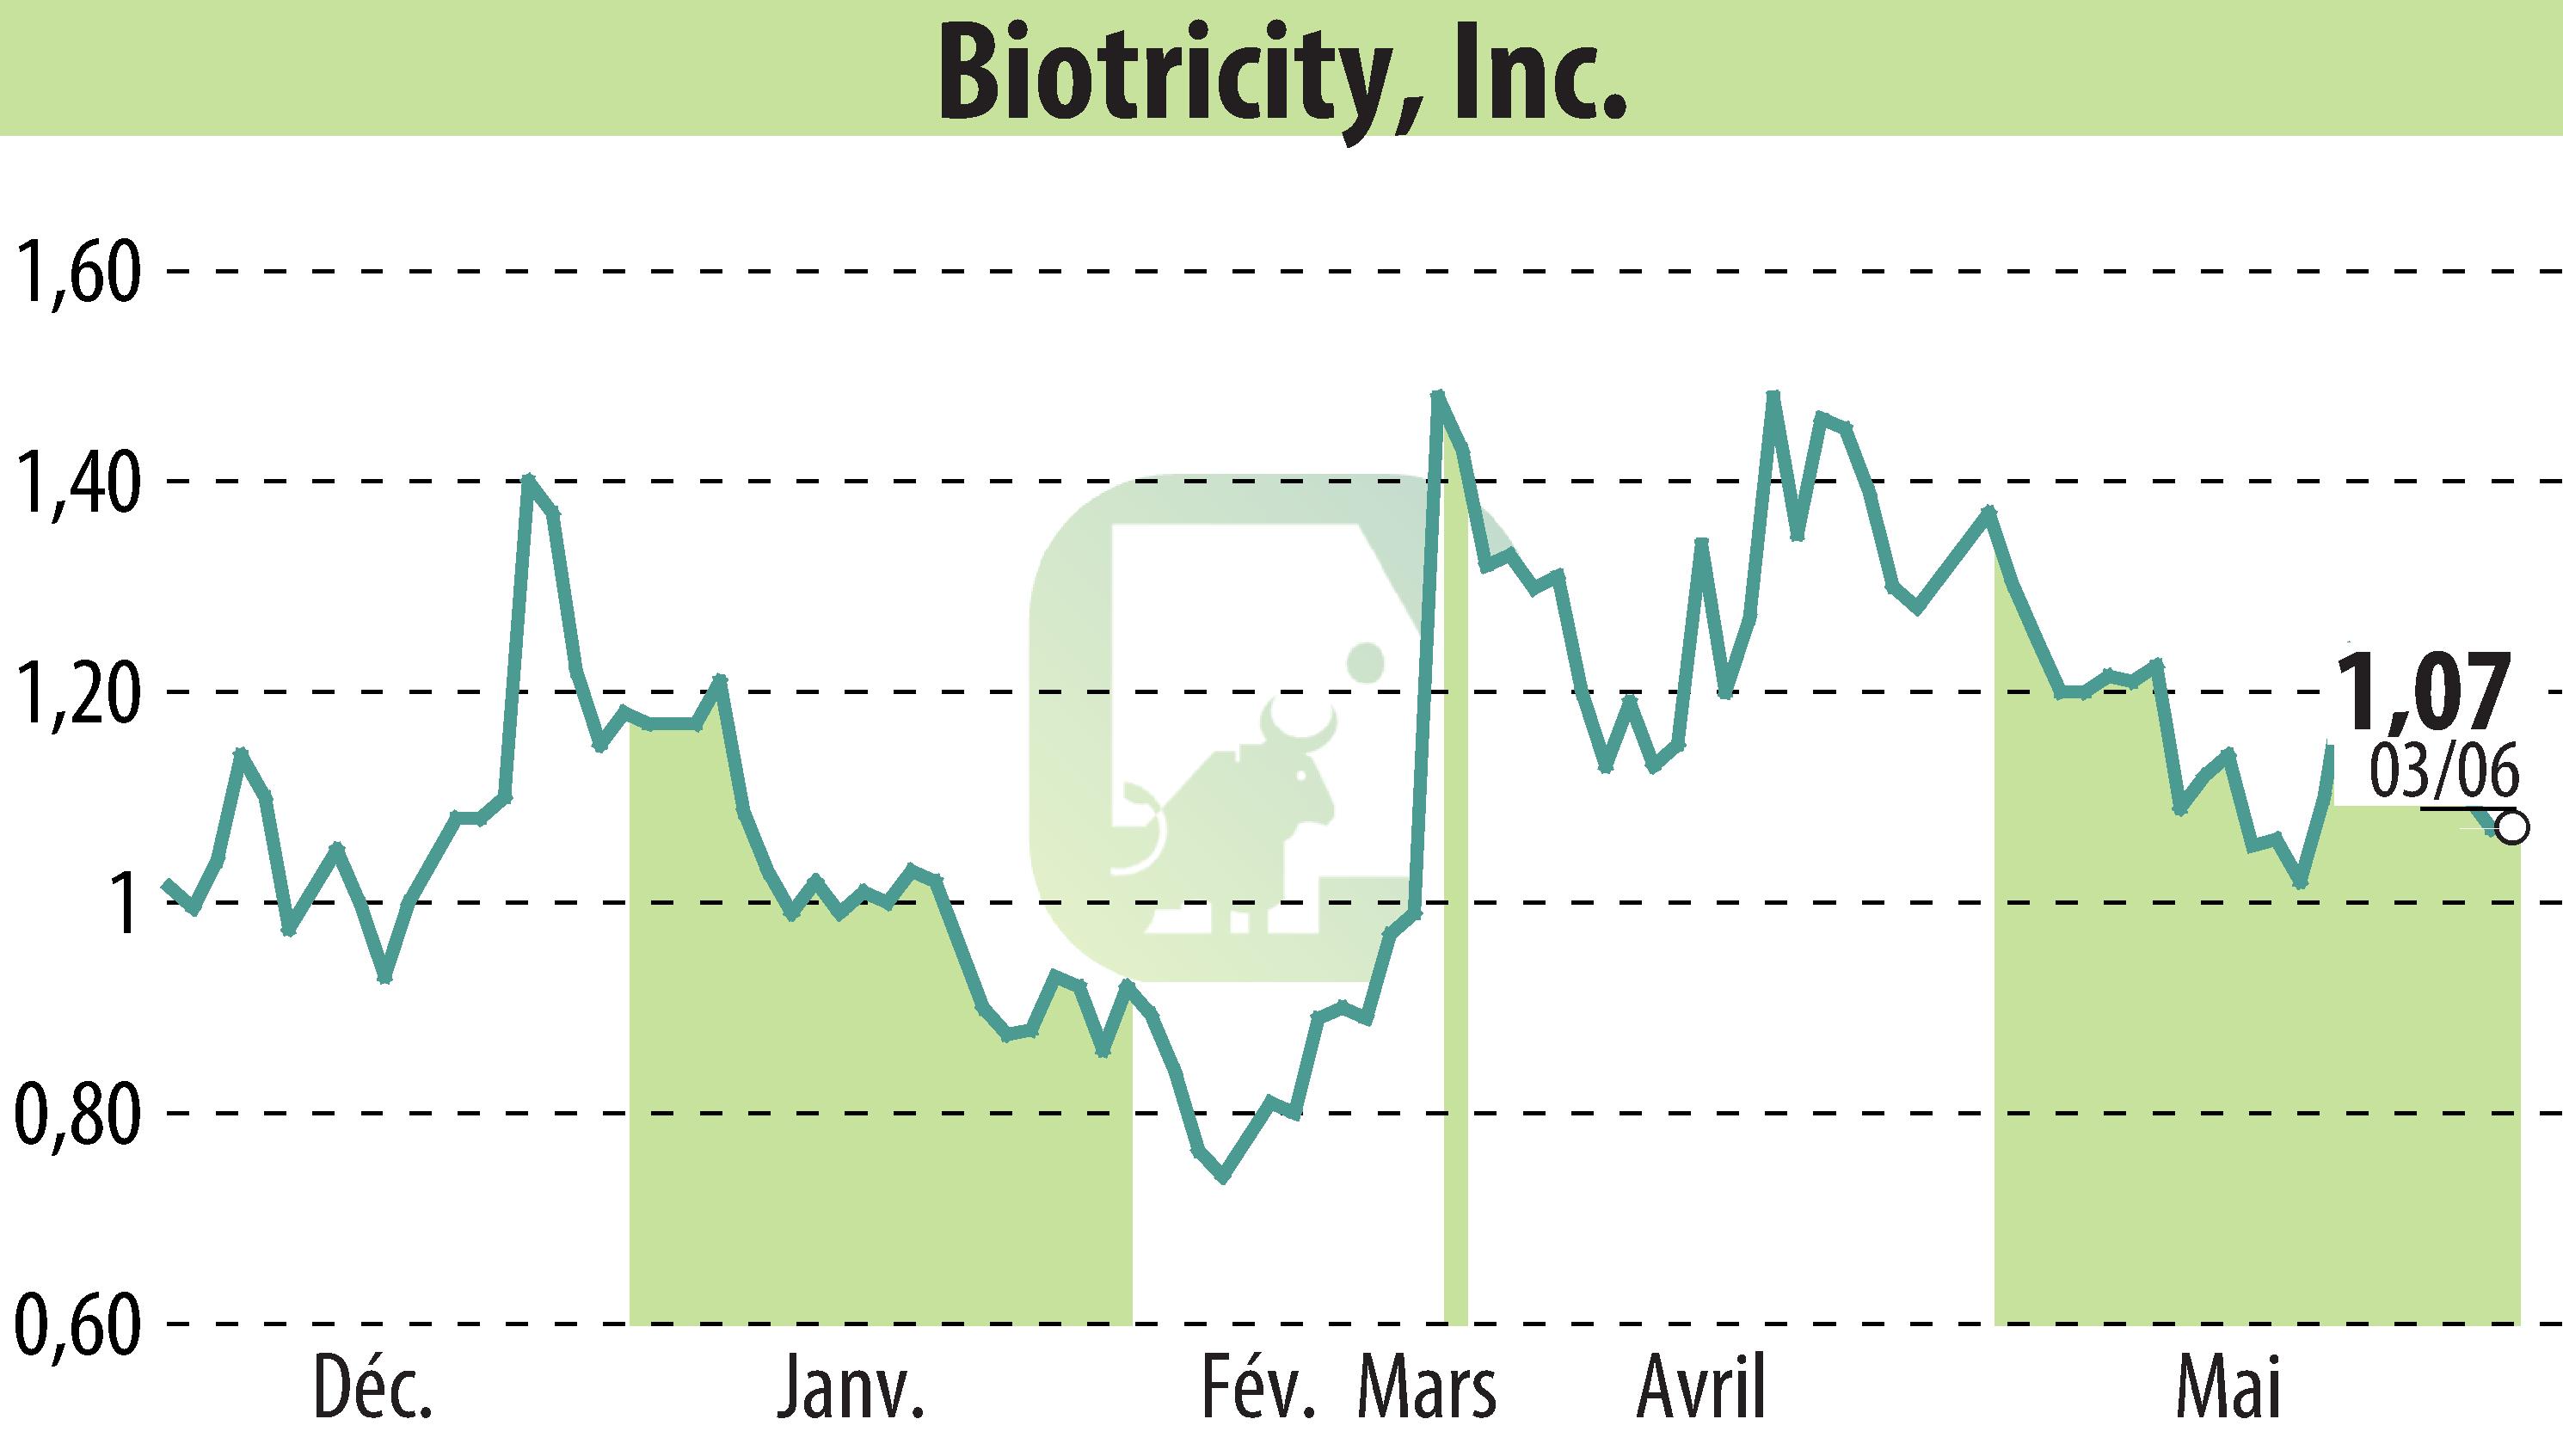 Stock price chart of Biotricity, Inc. (EBR:BTCY) showing fluctuations.